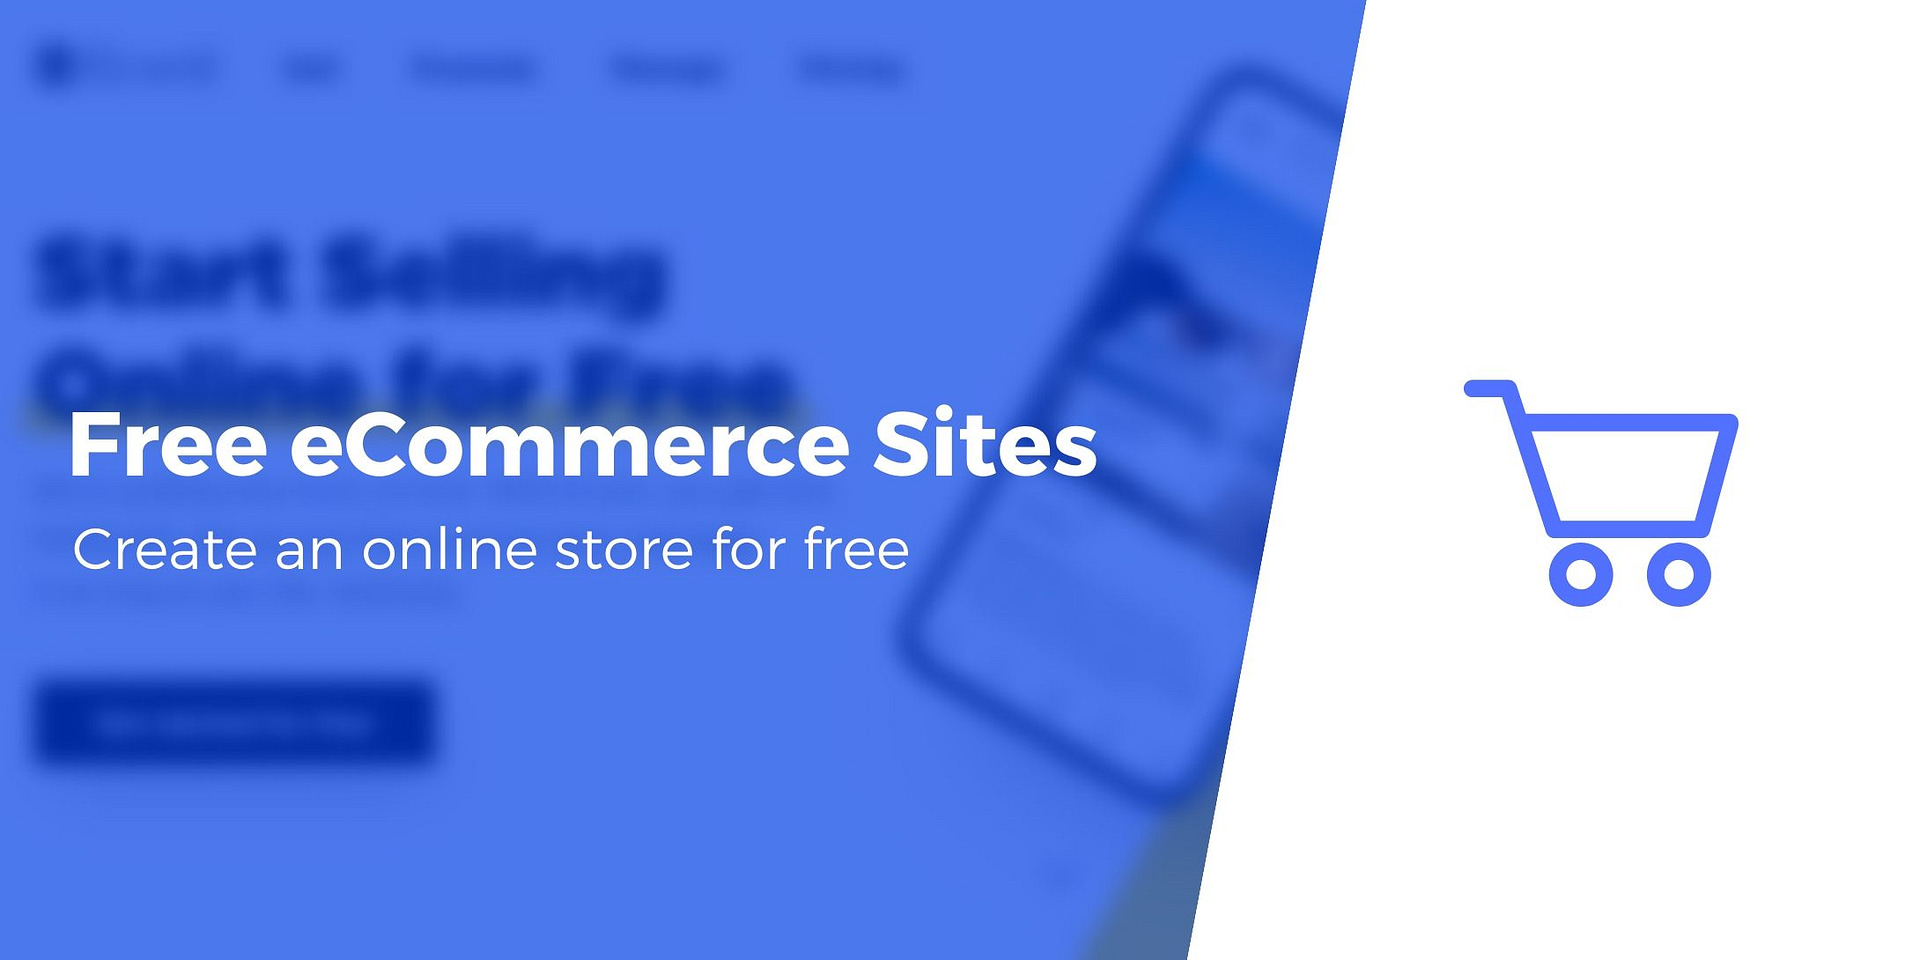 20 Sites for Free Stock Photos - Practical Ecommerce